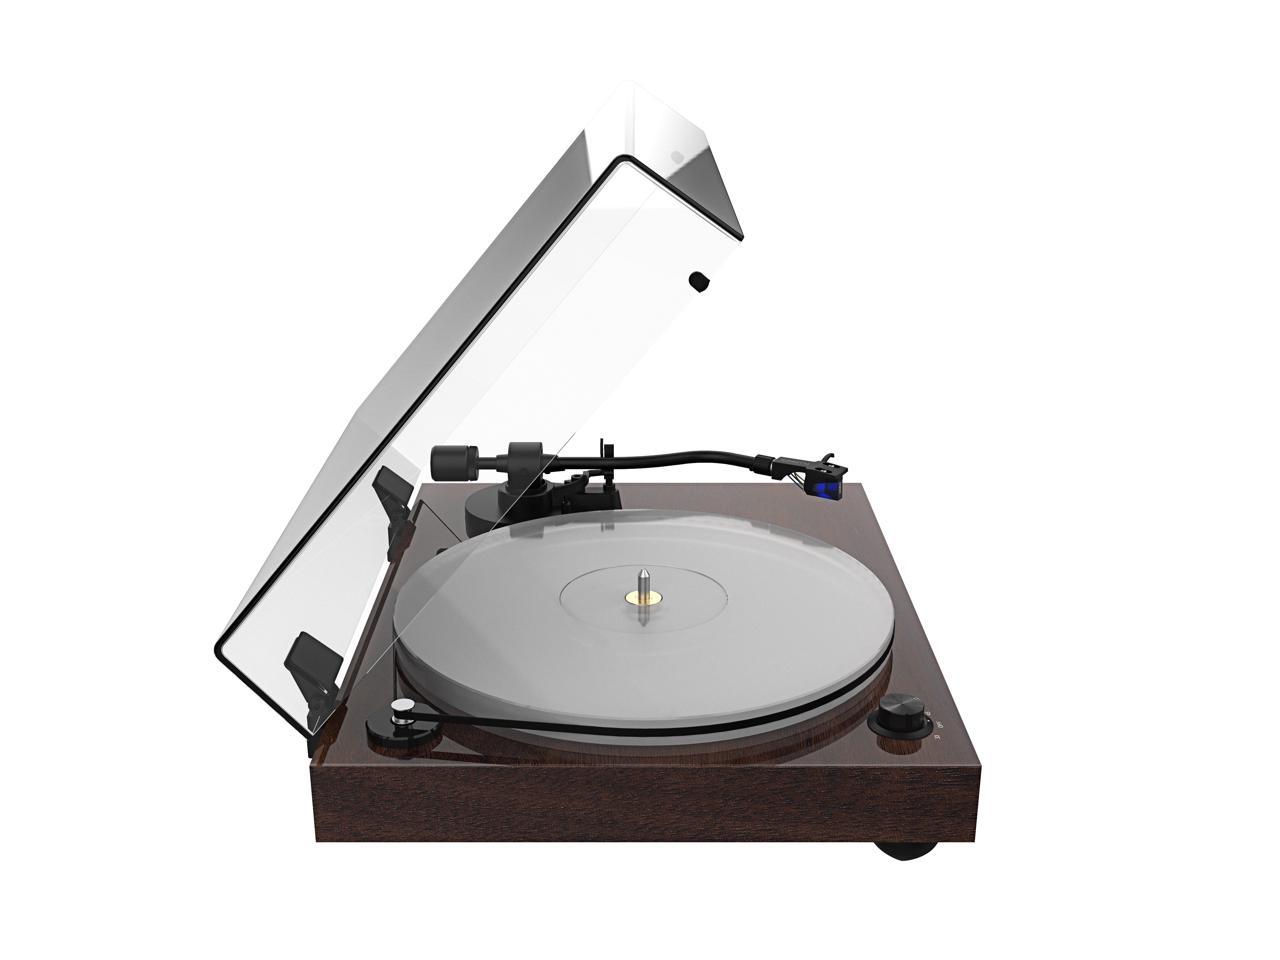 Fluance Rt85 Reference High Fidelity Vinyl Turntable Record Player With Ortofon 2m Blue